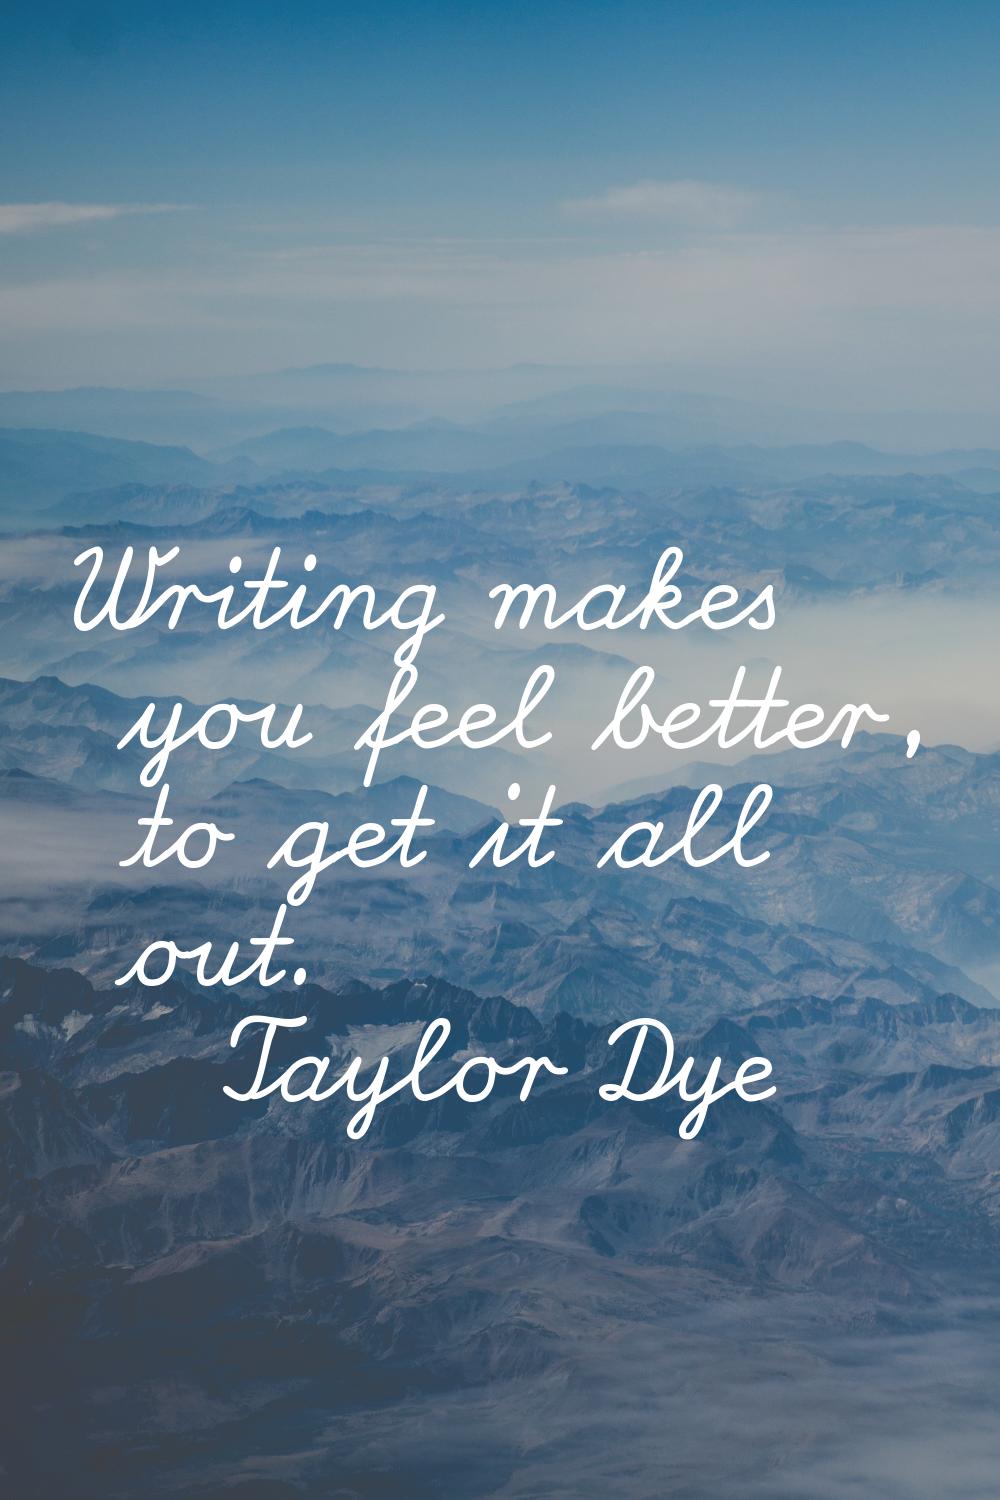 Writing makes you feel better, to get it all out.